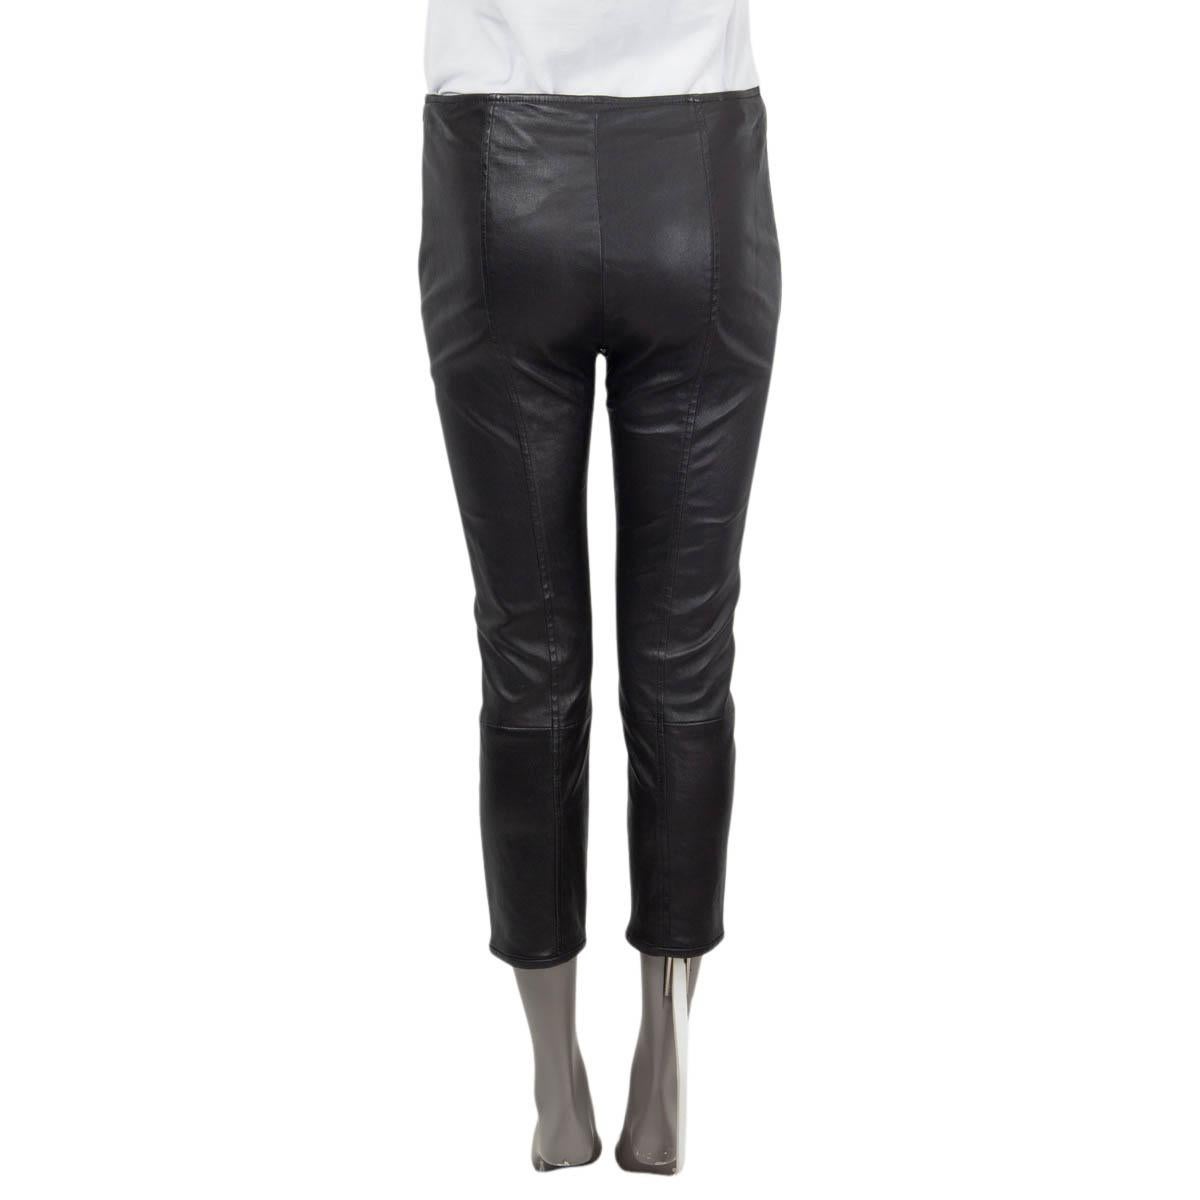 Black THE ROW black leather CROPPED SLIM Pants 8 M For Sale